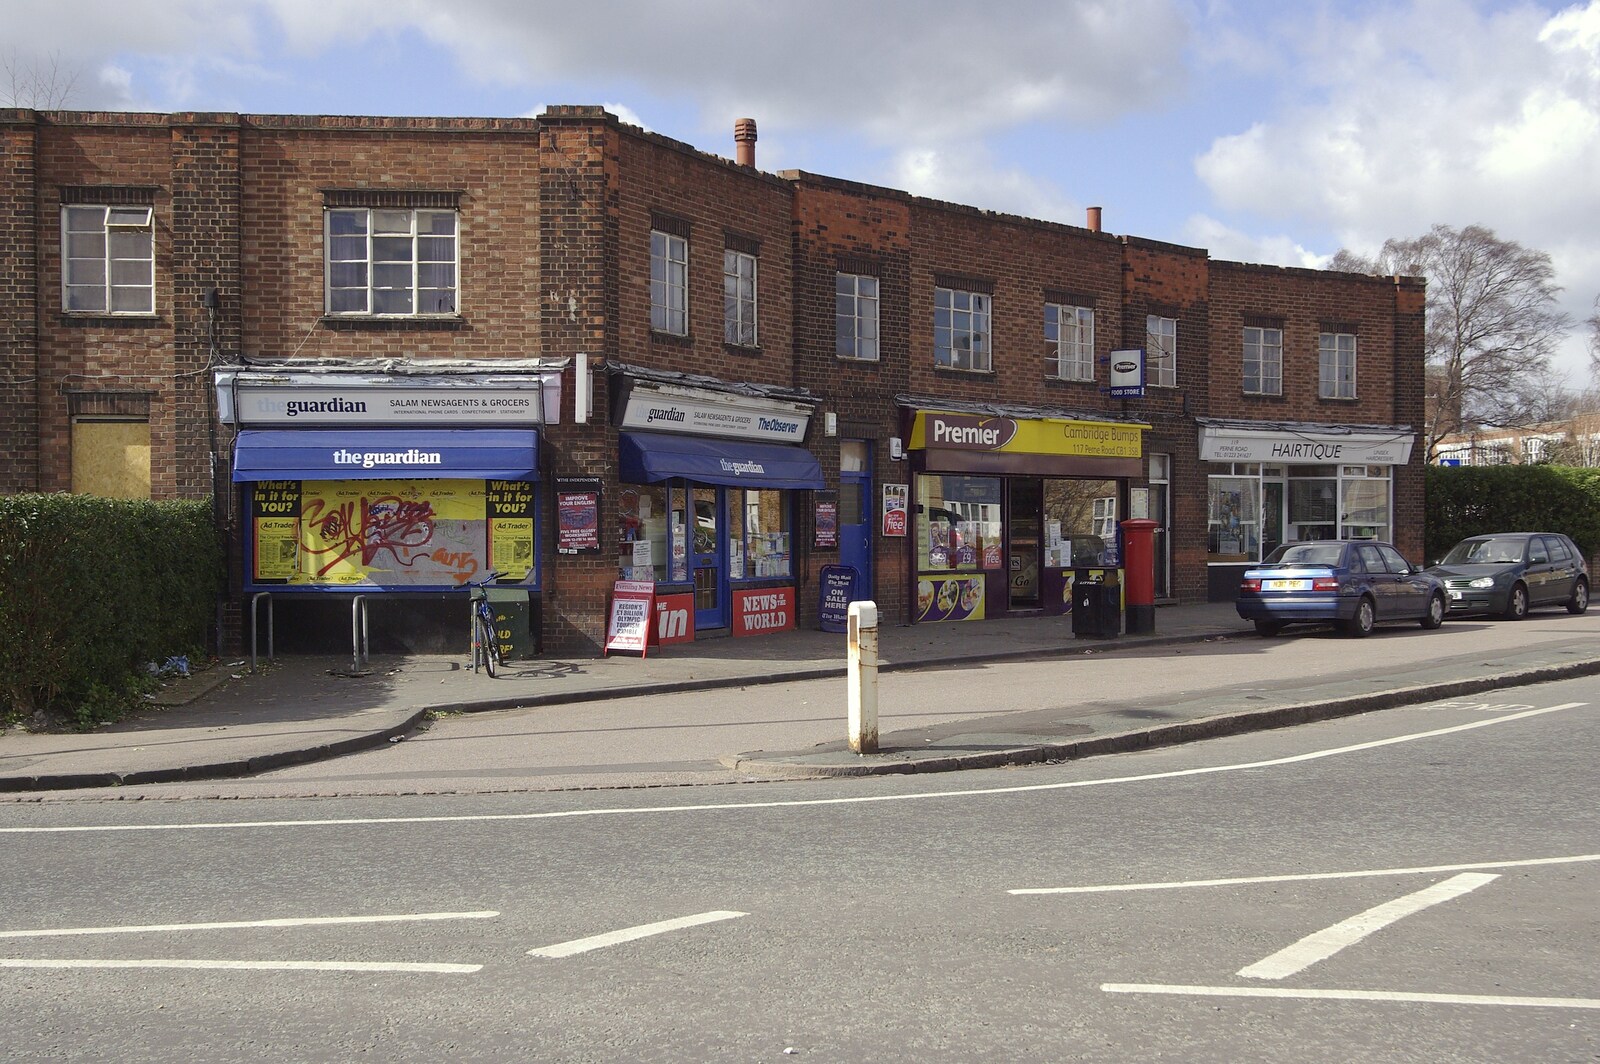 The row of shops on the Radegund Road roundabout from The Derelict Salam Newsagents, Perne Road, Cambridge - 18th March 2007